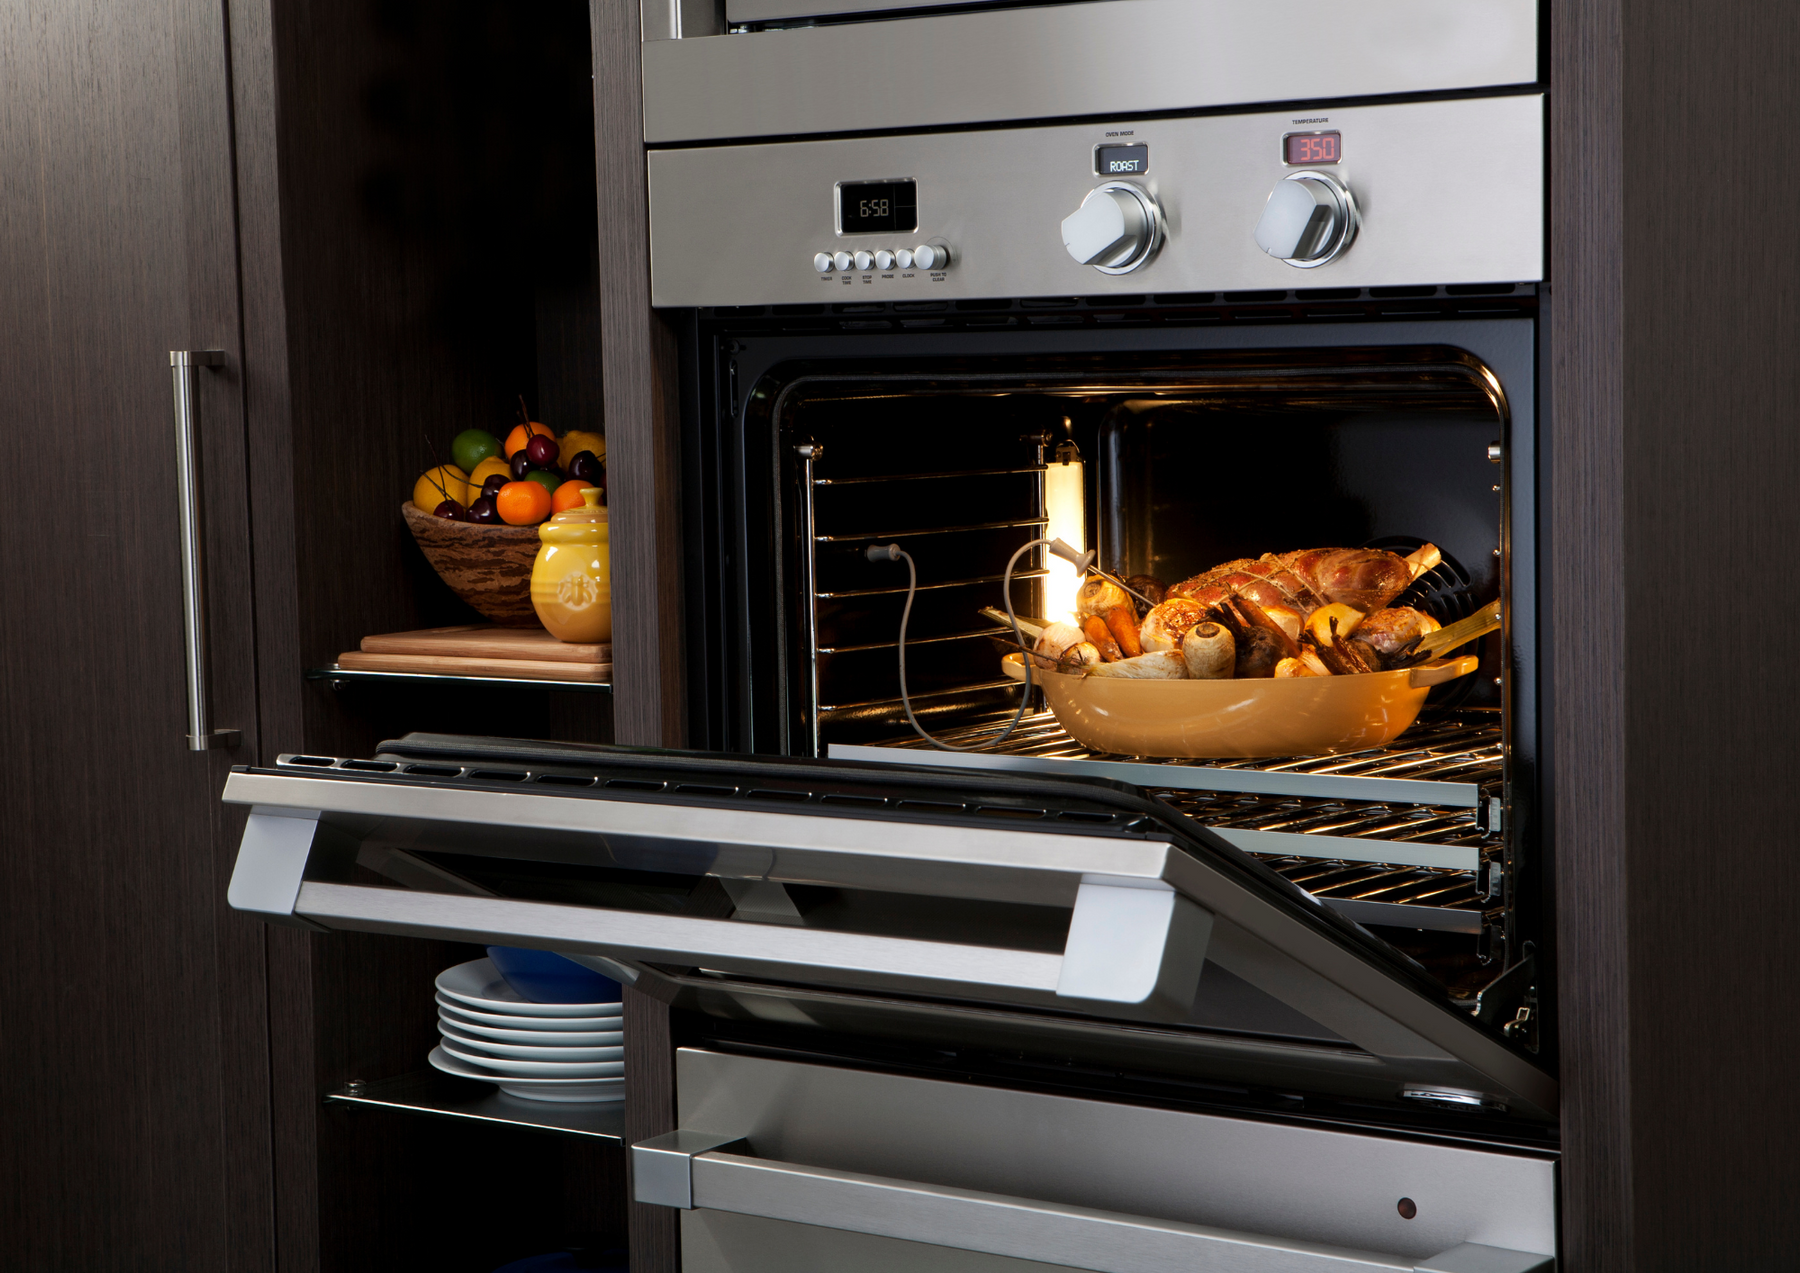 Top 5 Best Ovens for Your Kitchen: Our Expert Recommendations